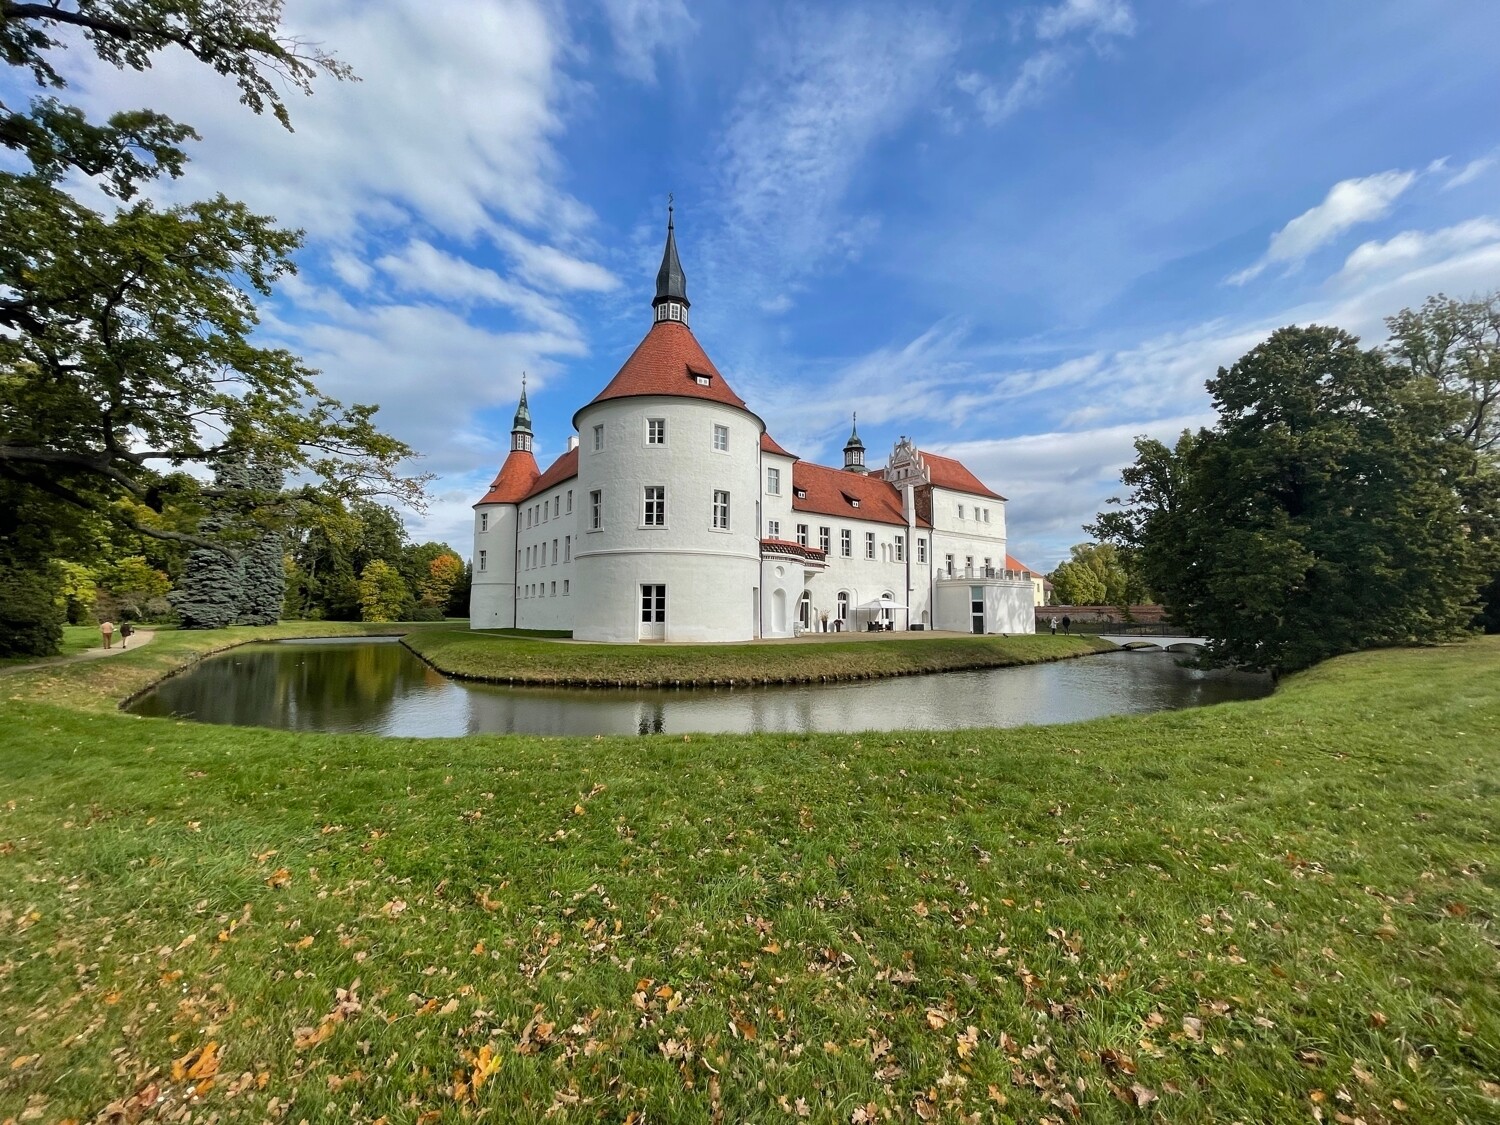 Princely moated castle